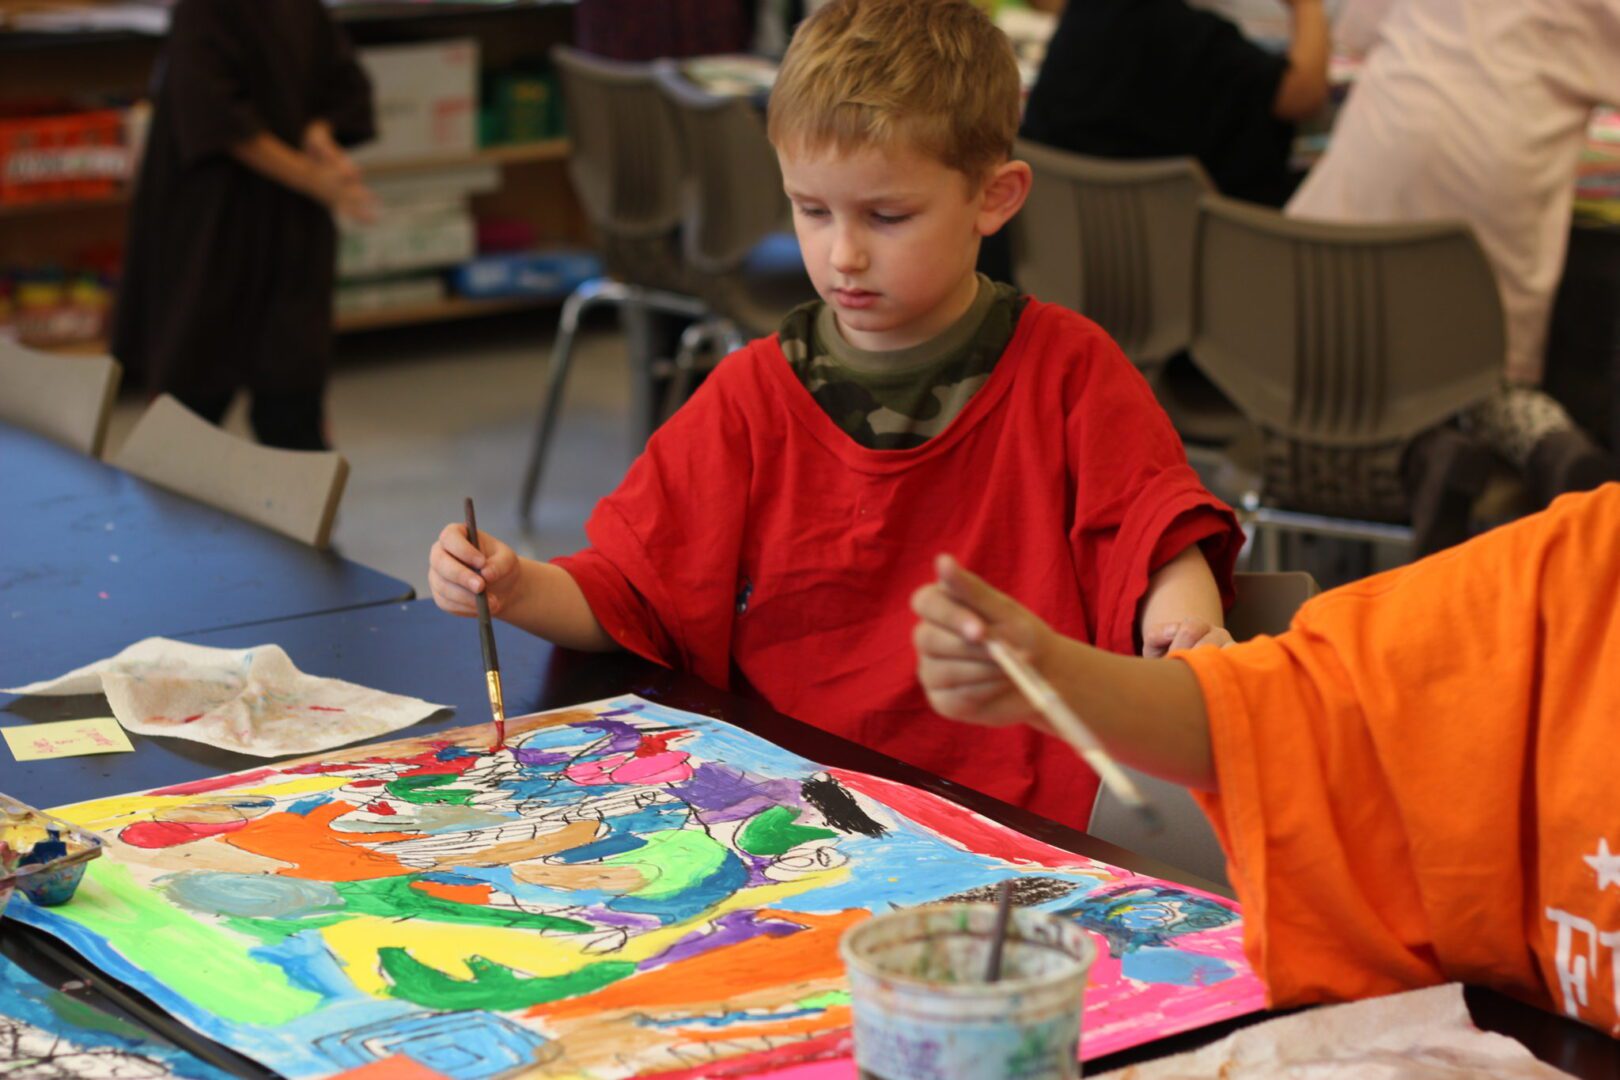 A young boy is painting a painting in a classroom.